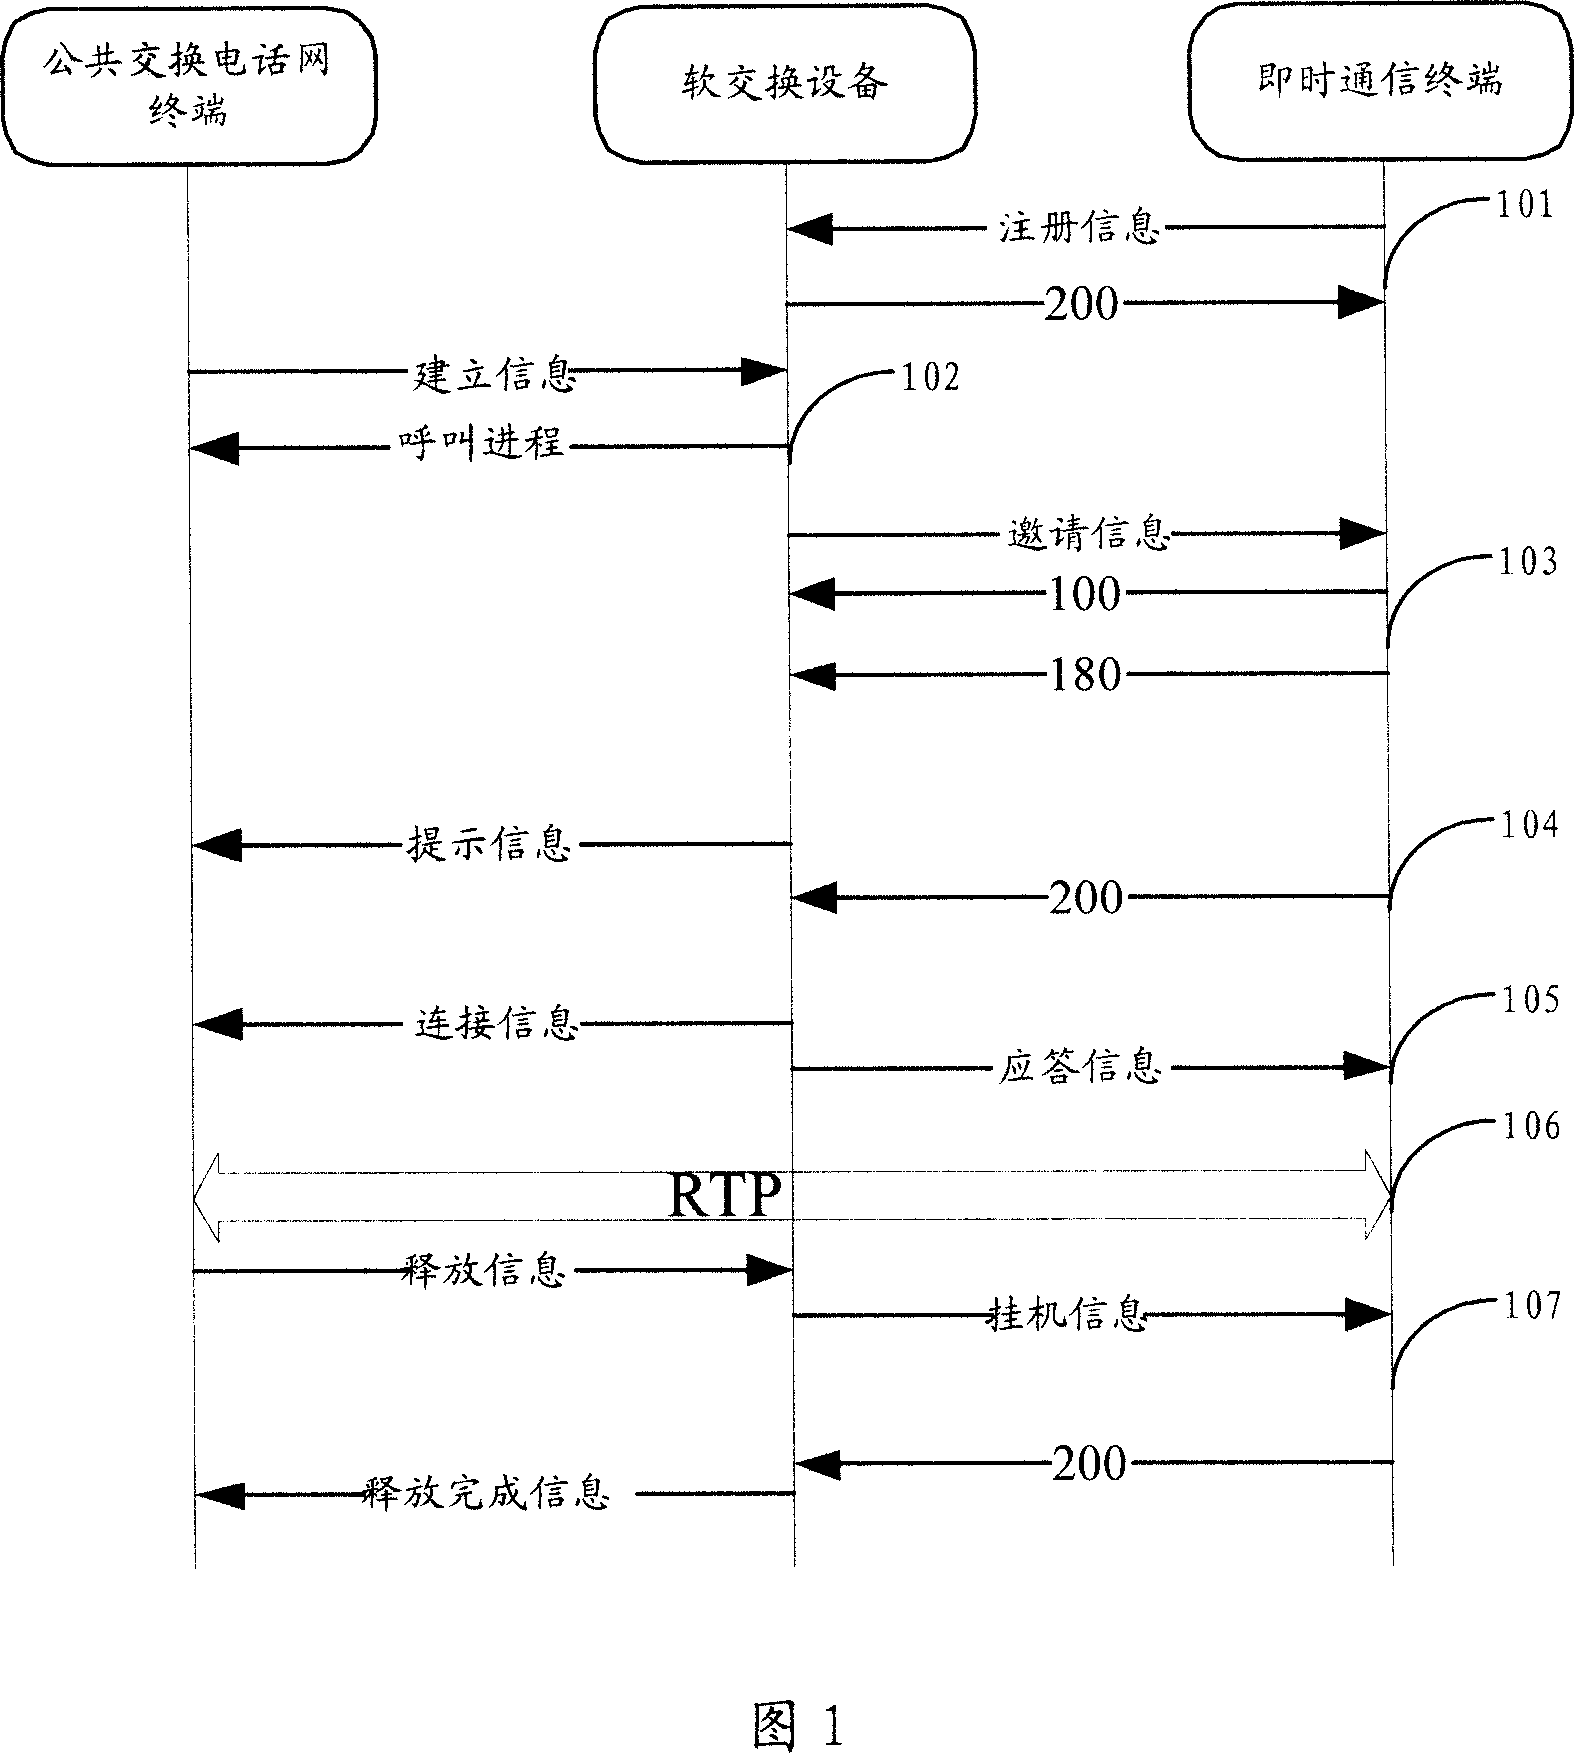 Method and system for messaging between public exchange telephone network terminal and immediate communication terminal